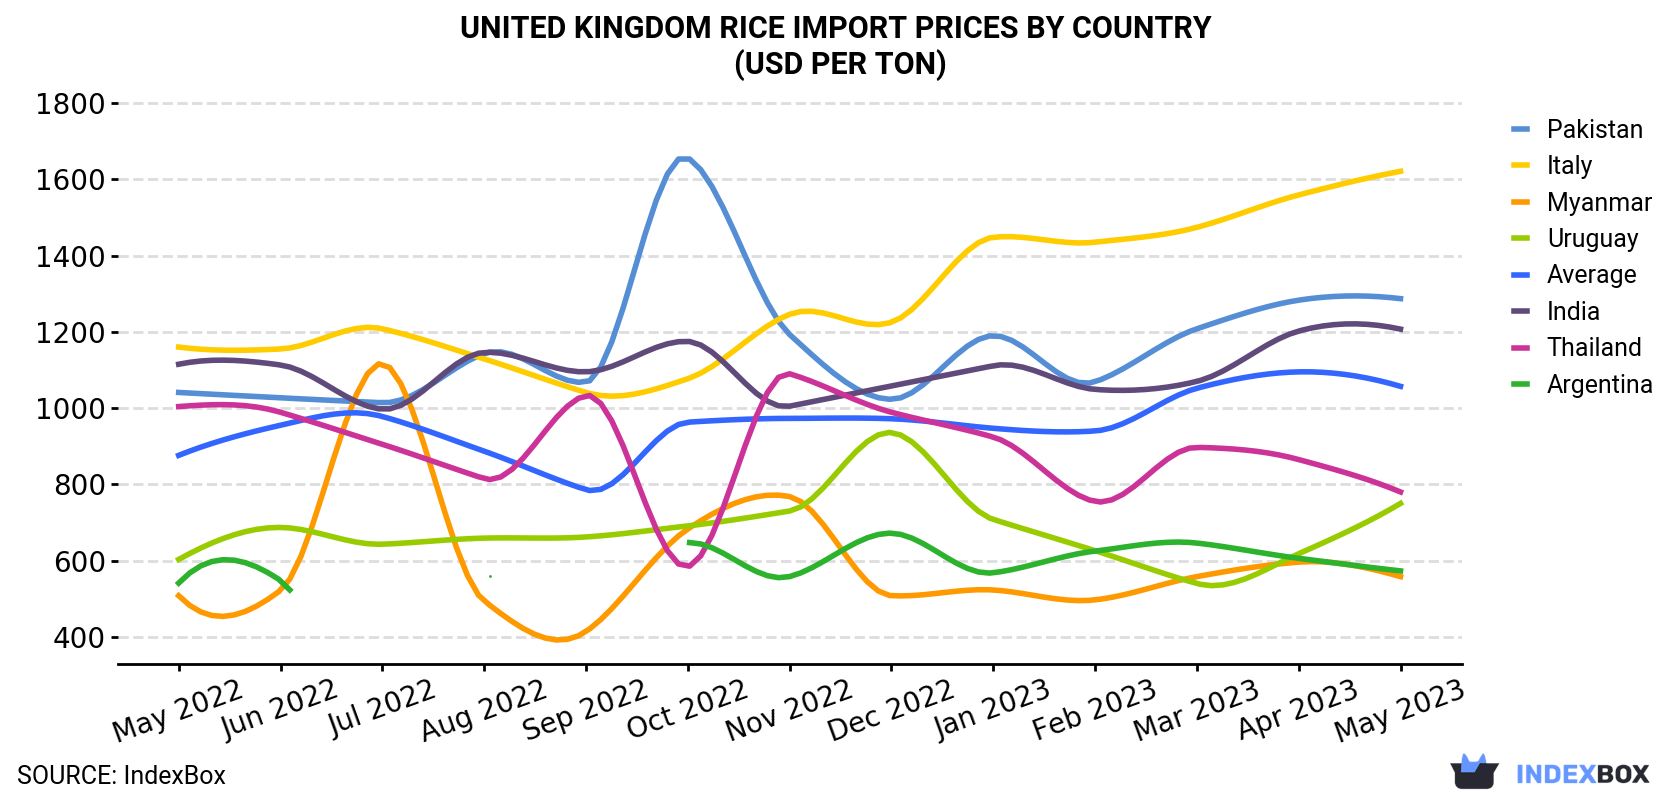 United Kingdom Rice Import Prices By Country (USD Per Ton)